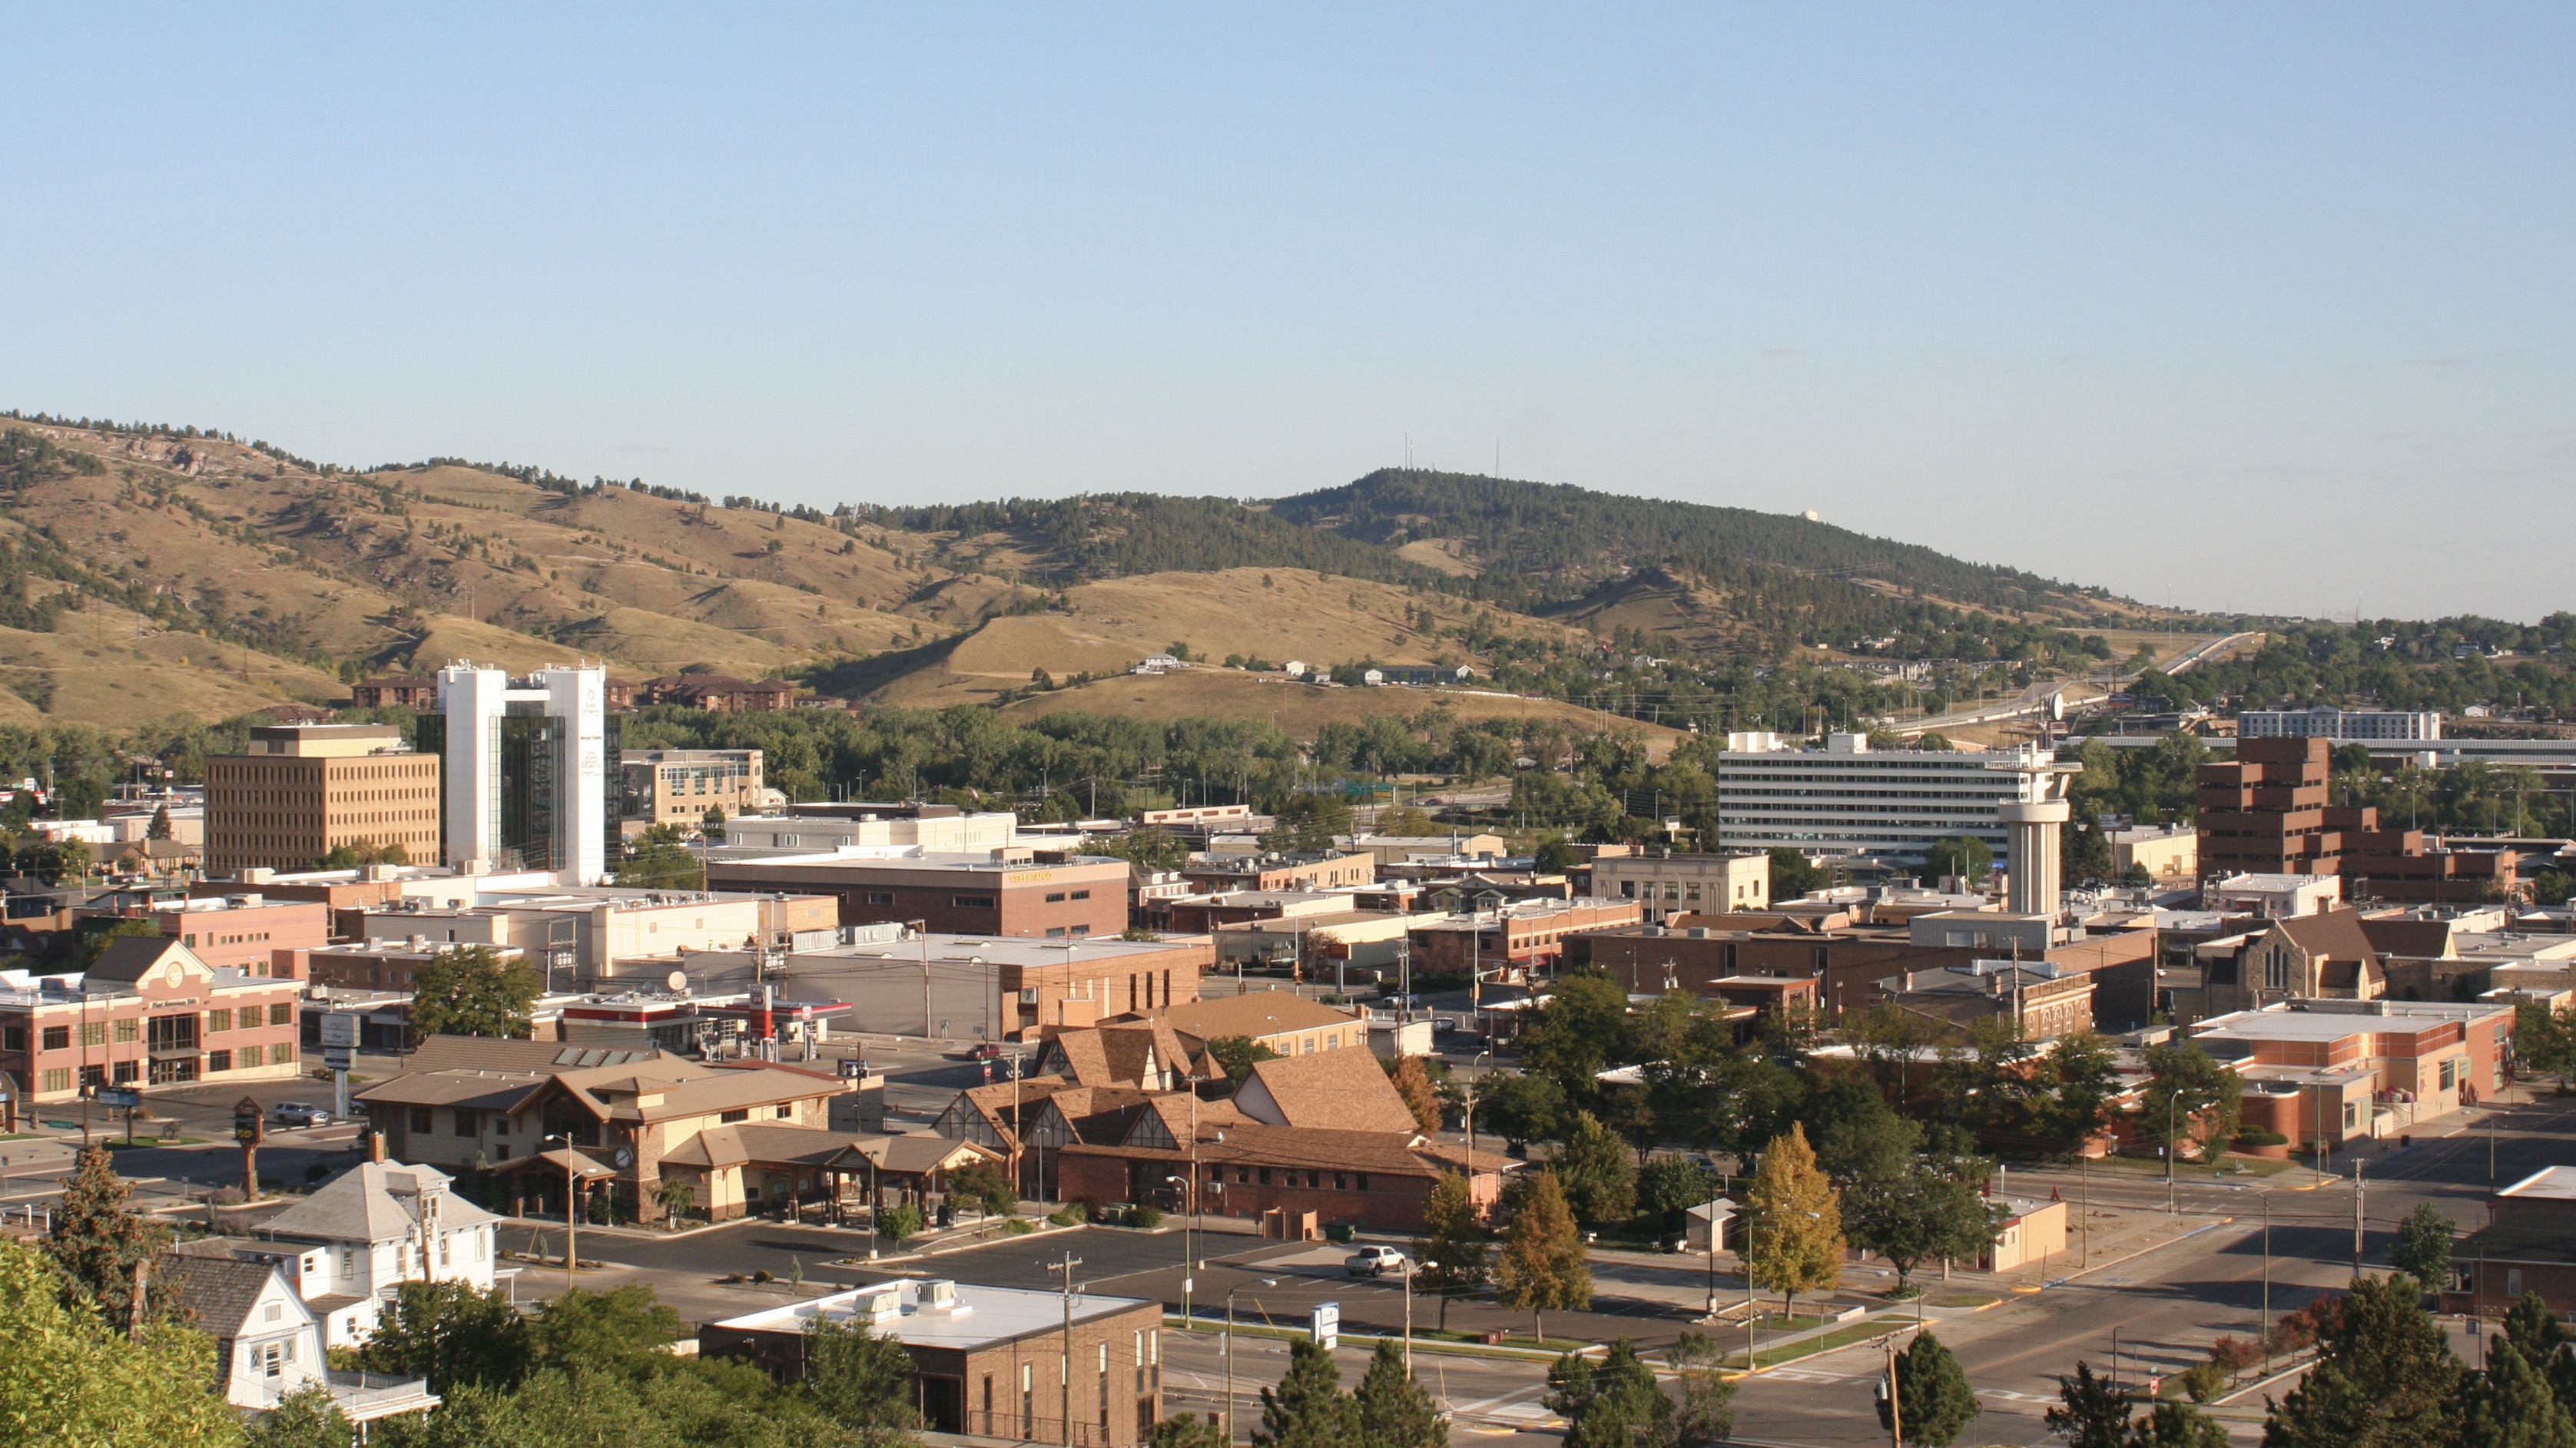 Rapid City is the second most populous city in South Dakota after Sioux Falls and the county seat of Pennington County. Named after Rapid Creek, where the settlement developed, it is in western South Dakota, on the Black Hills' eastern slope. The population was 74,703 as of the 2020 census.Known as the "Gateway to the Black Hills" and the "City of Presidents" because of the life-size bronze president statues downtown, Rapid City is split by a low mountain ridge that divides the city's western and eastern parts, called ‘The Gap.’ Ellsworth Air Force Base is on the city's outskirts. Camp Rapid, part of the South Dakota Army National Guard, is in the city's western part.
Rapid City is home to such attractions as Art Alley, Dinosaur Park, the City of Presidents walking tour, Chapel in the Hills, Storybook Island, and Main Street Square. The historic "Old West" town of Deadwood is nearby. In the neighboring Black Hills are the tourist attractions of Mount Rushmore, the Crazy Horse Memorial, Custer State Park, Wind Cave National Park, Jewel Cave National Monument, and the museum at the Black Hills Institute of Geological Research. To the city's east is Badlands National Park.